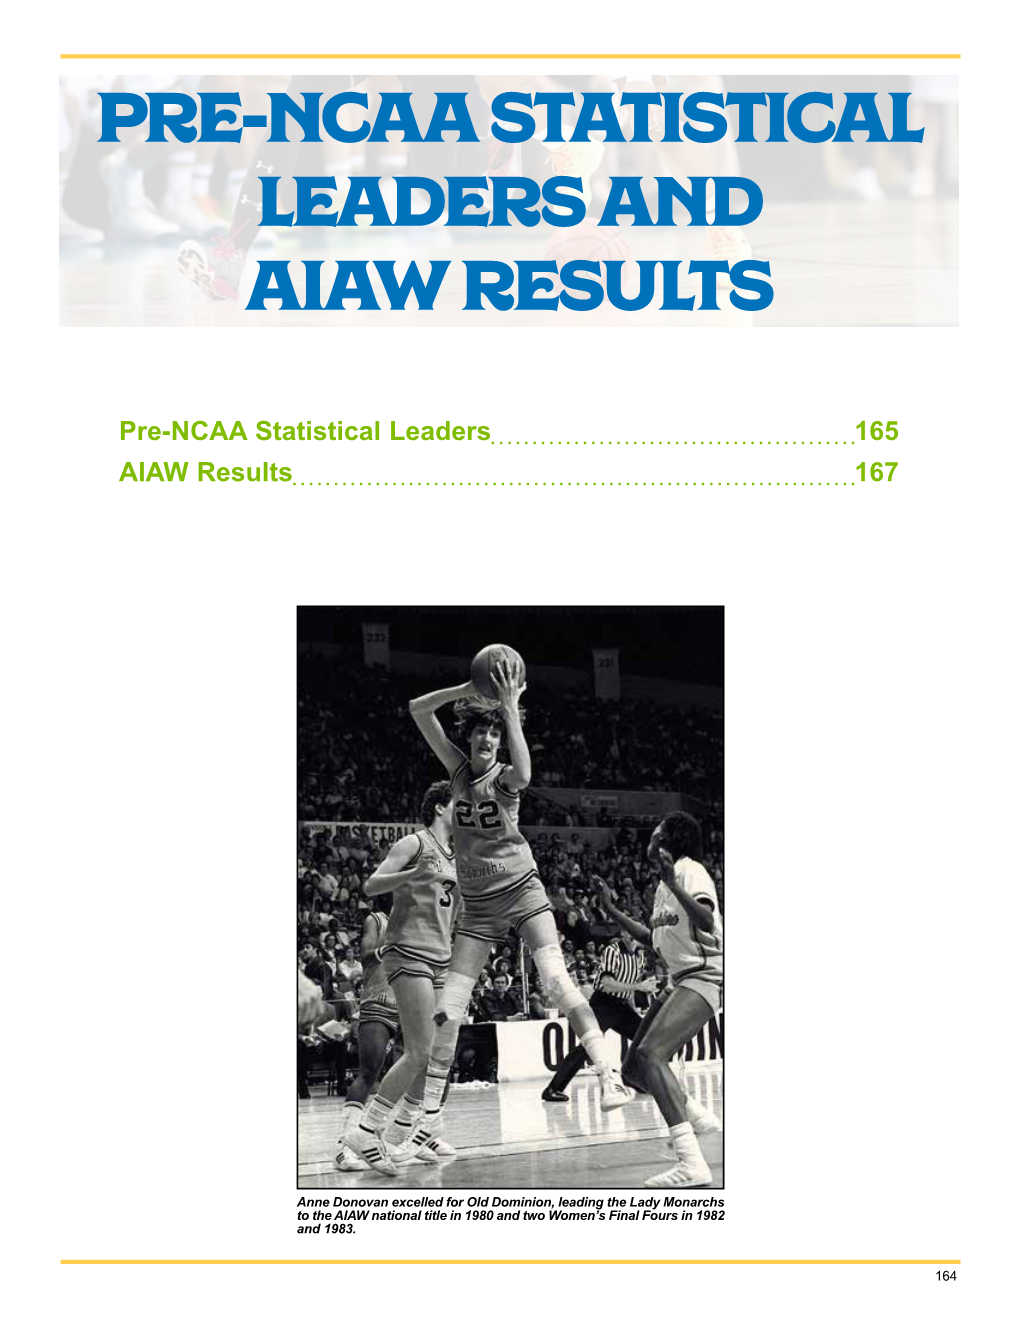 Pre-Ncaa Statistical Leaders and Aiaw Results